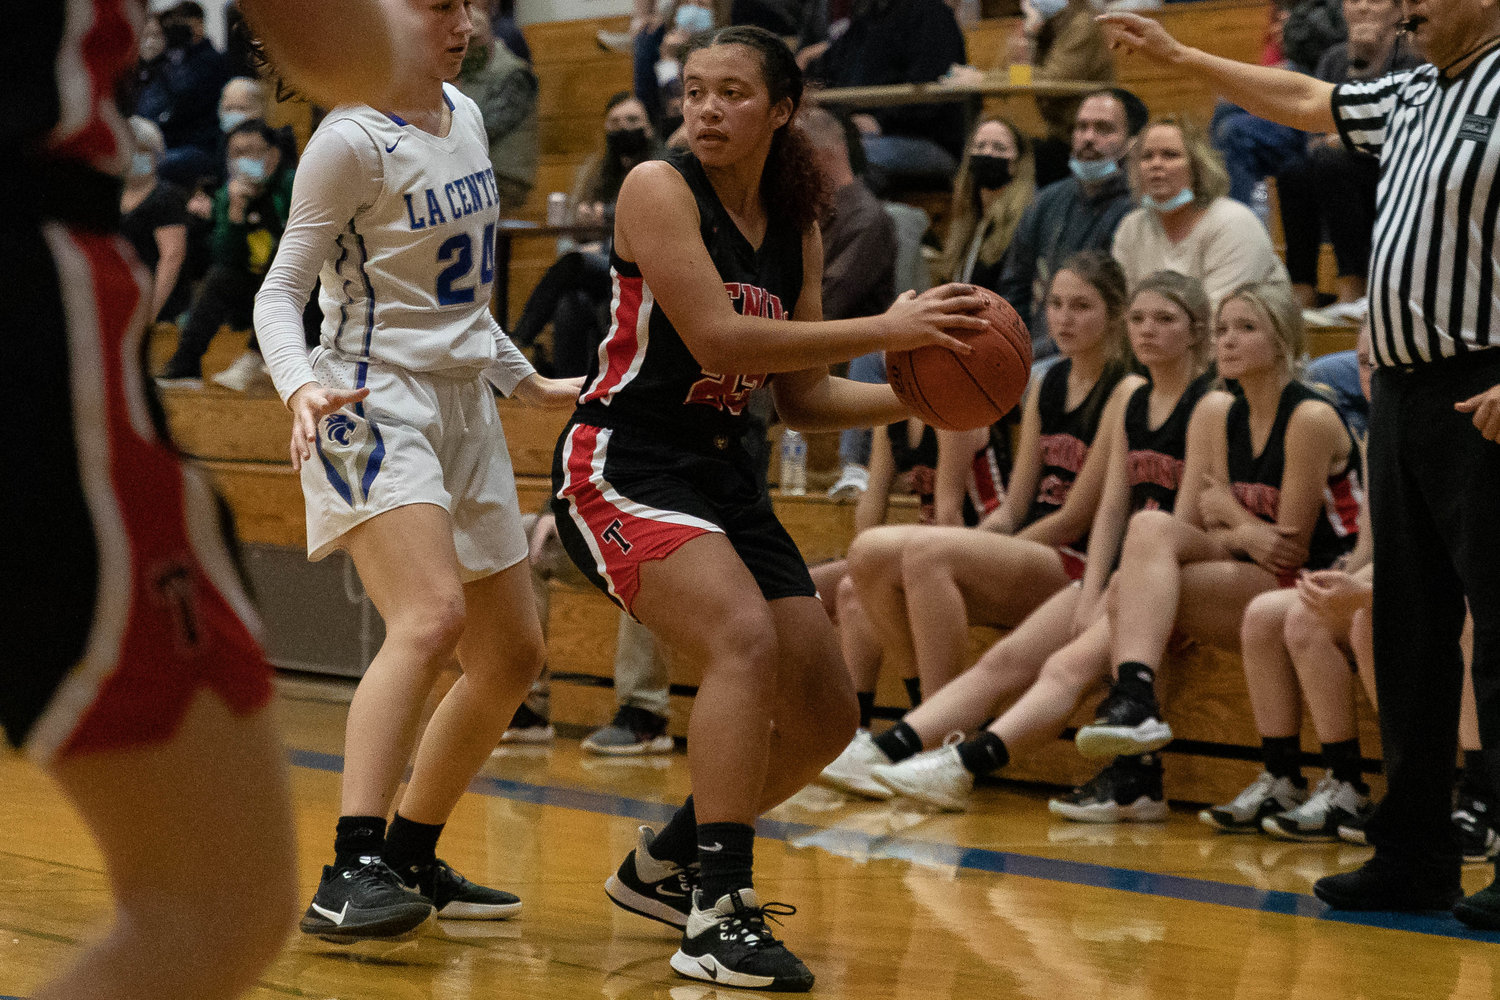 Tenino forward Alivia Hunter looks to pass down the baseline against La Center in the 1A District IV semifinals Feb. 15.